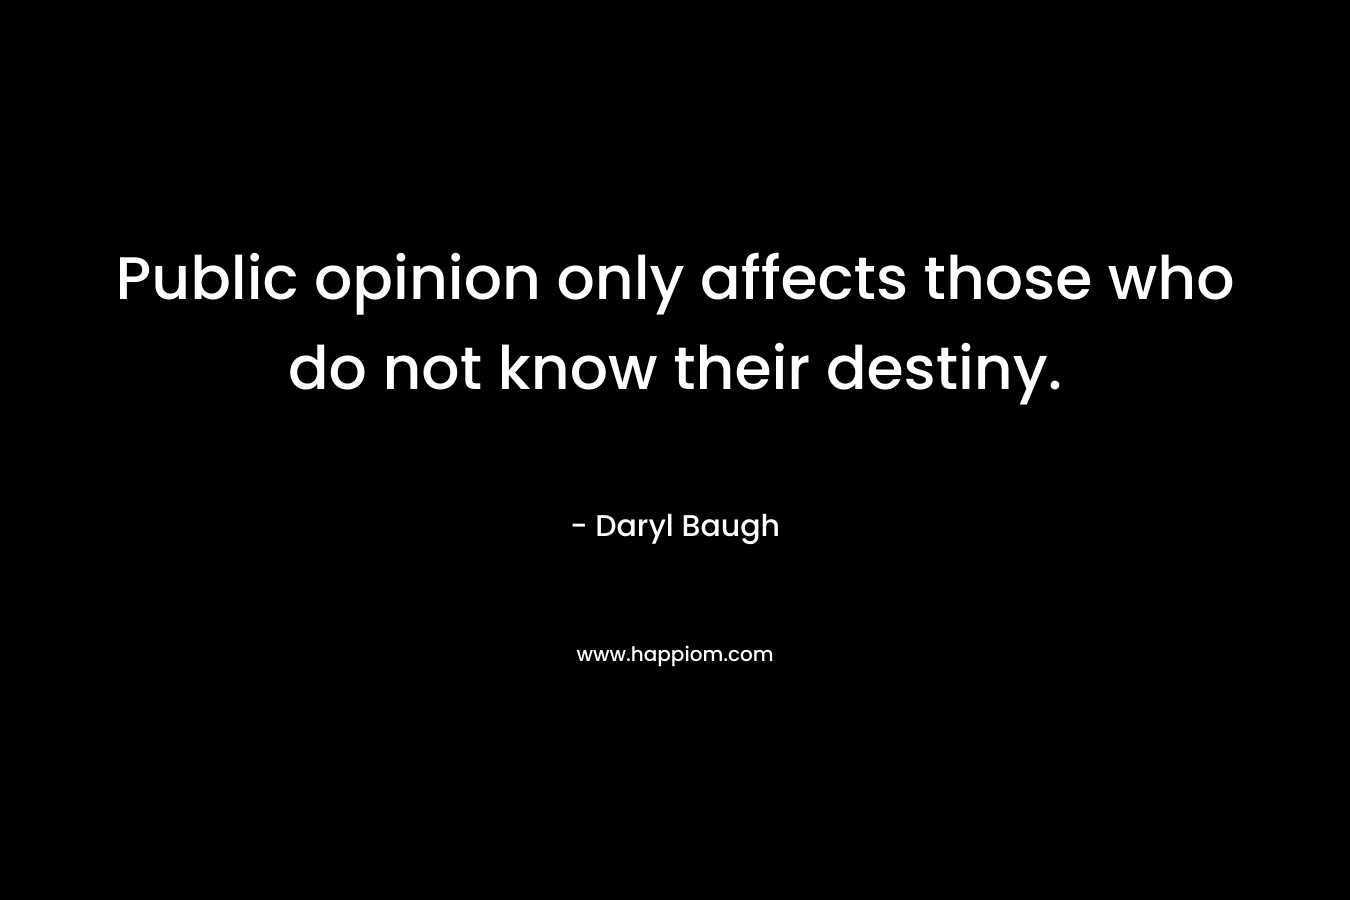 Public opinion only affects those who do not know their destiny.